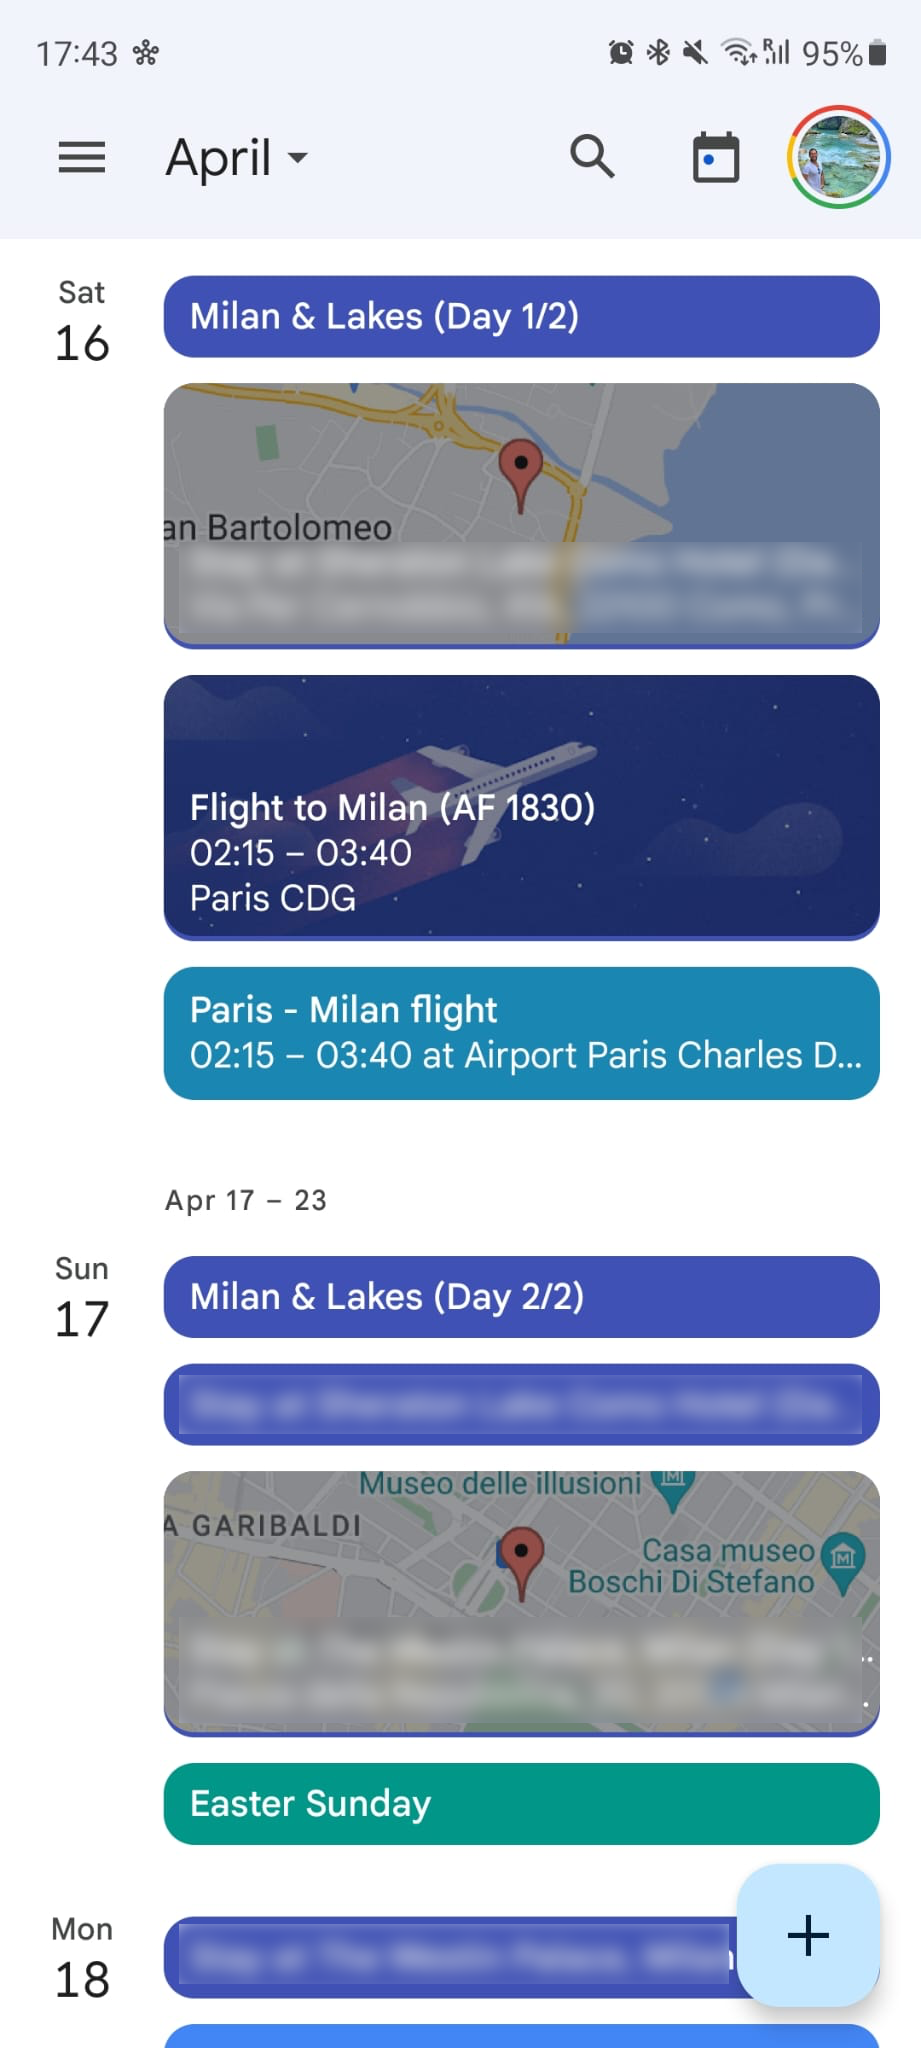 How to easily plan a trip with Google services